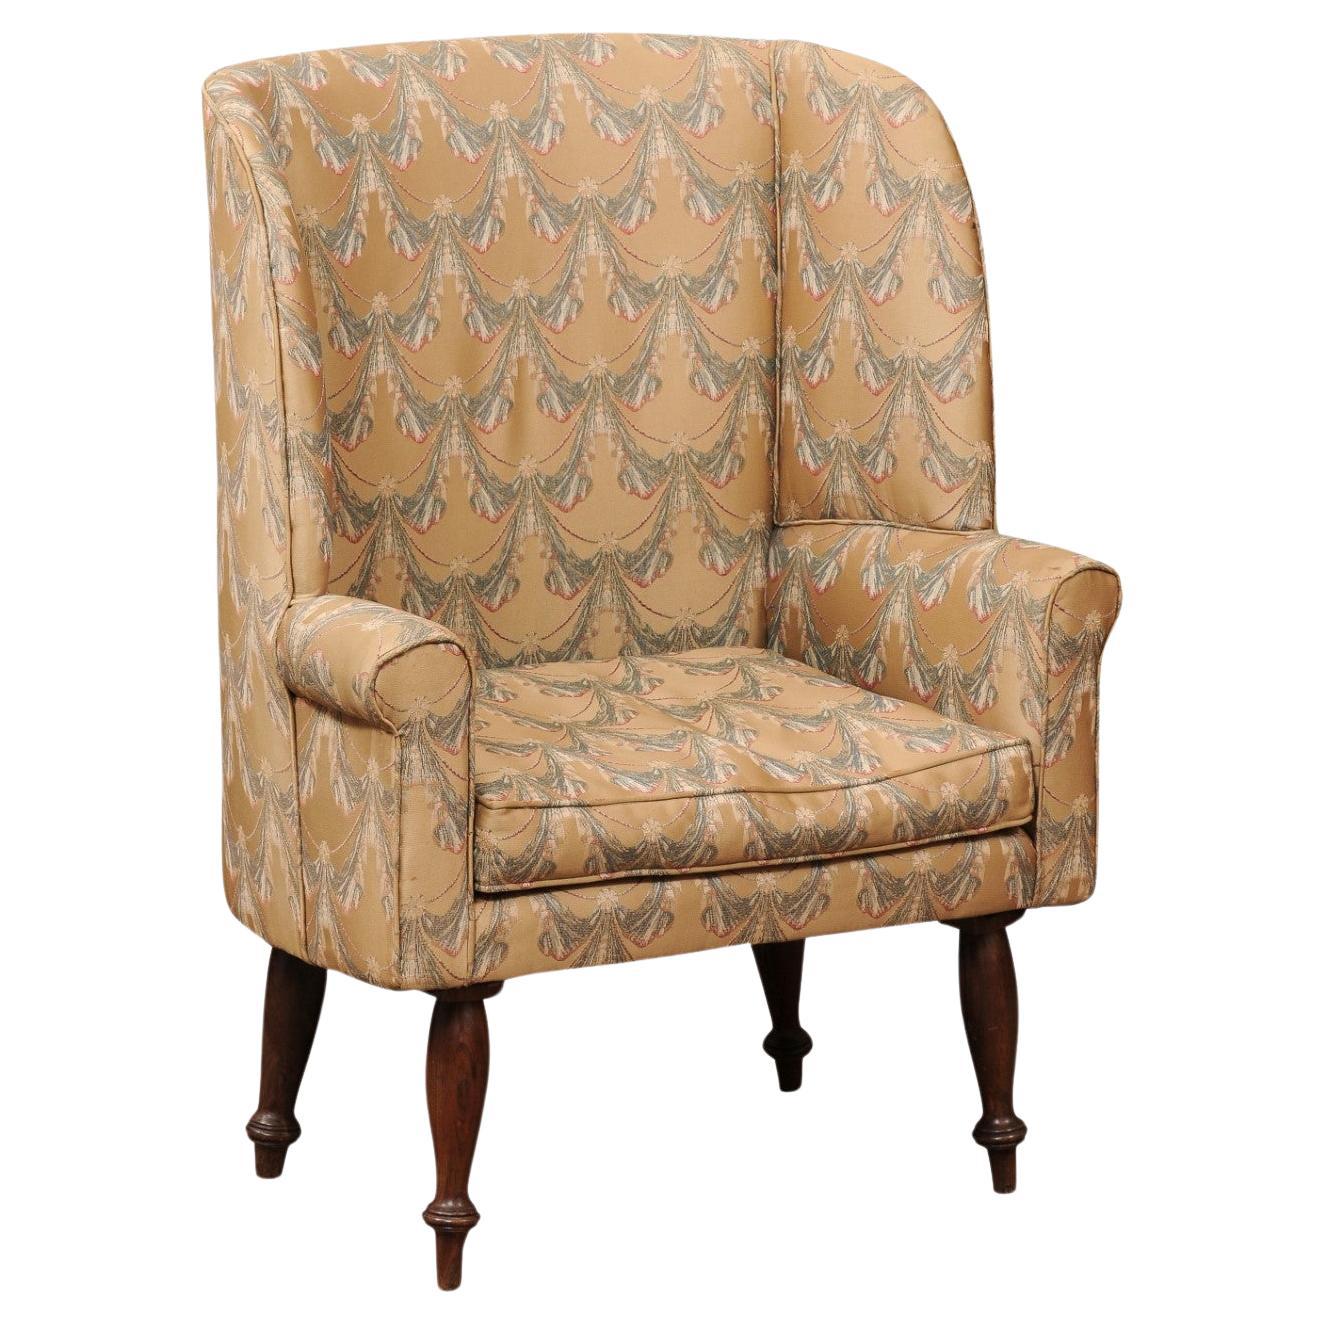 English 19th Century Rosewood Upholstered Barrel Wing Back Chair For Sale